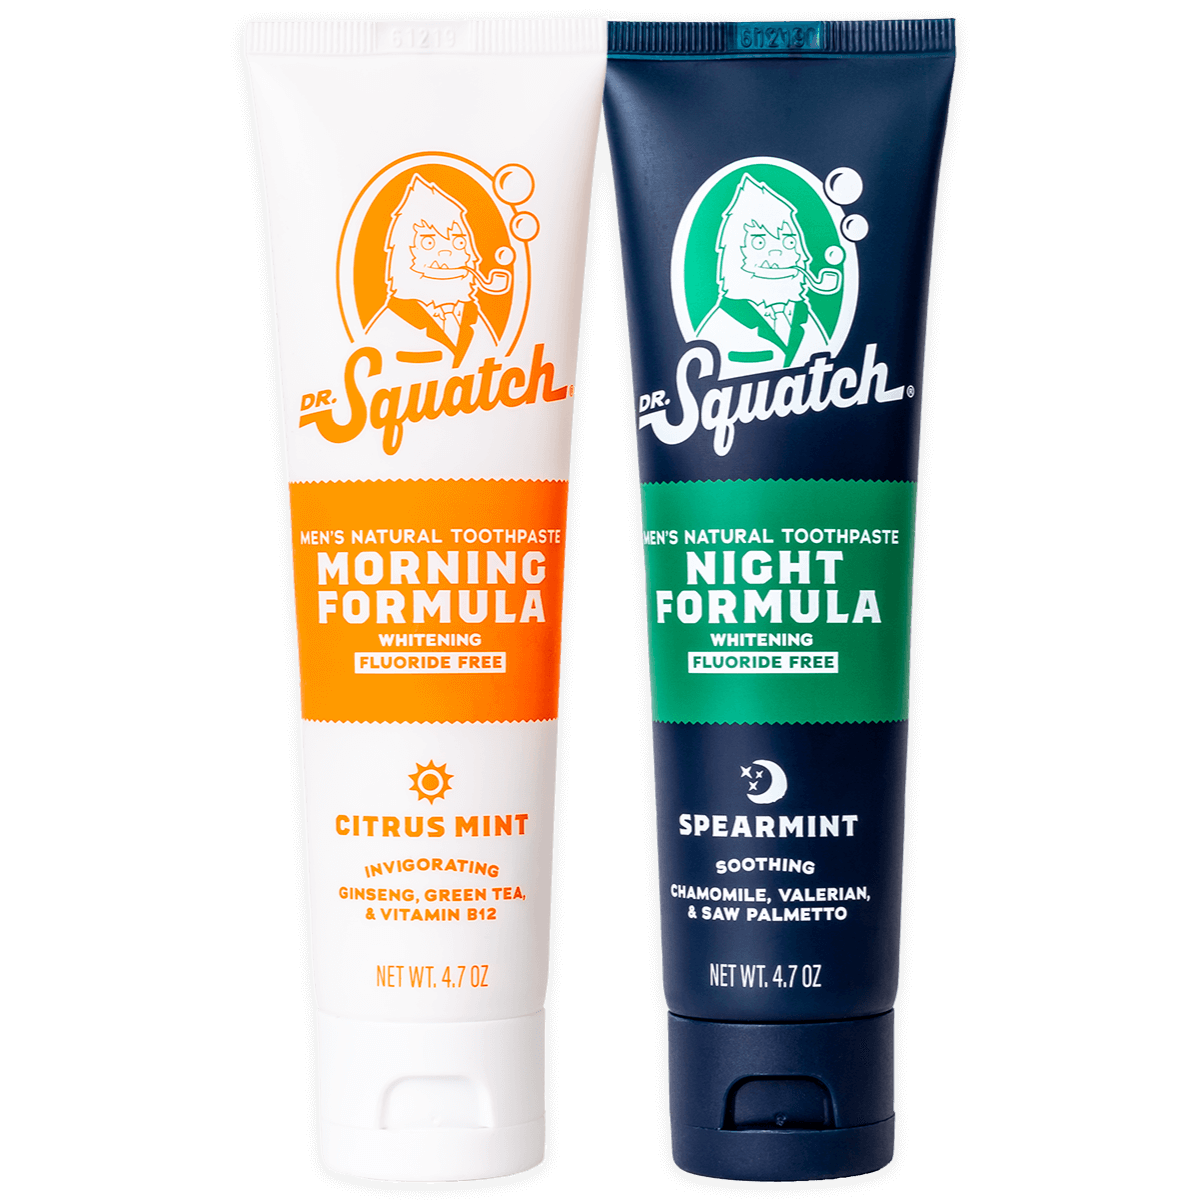 Dr. Squatch Toothpaste - Send to Mount Gilead, OH Today!